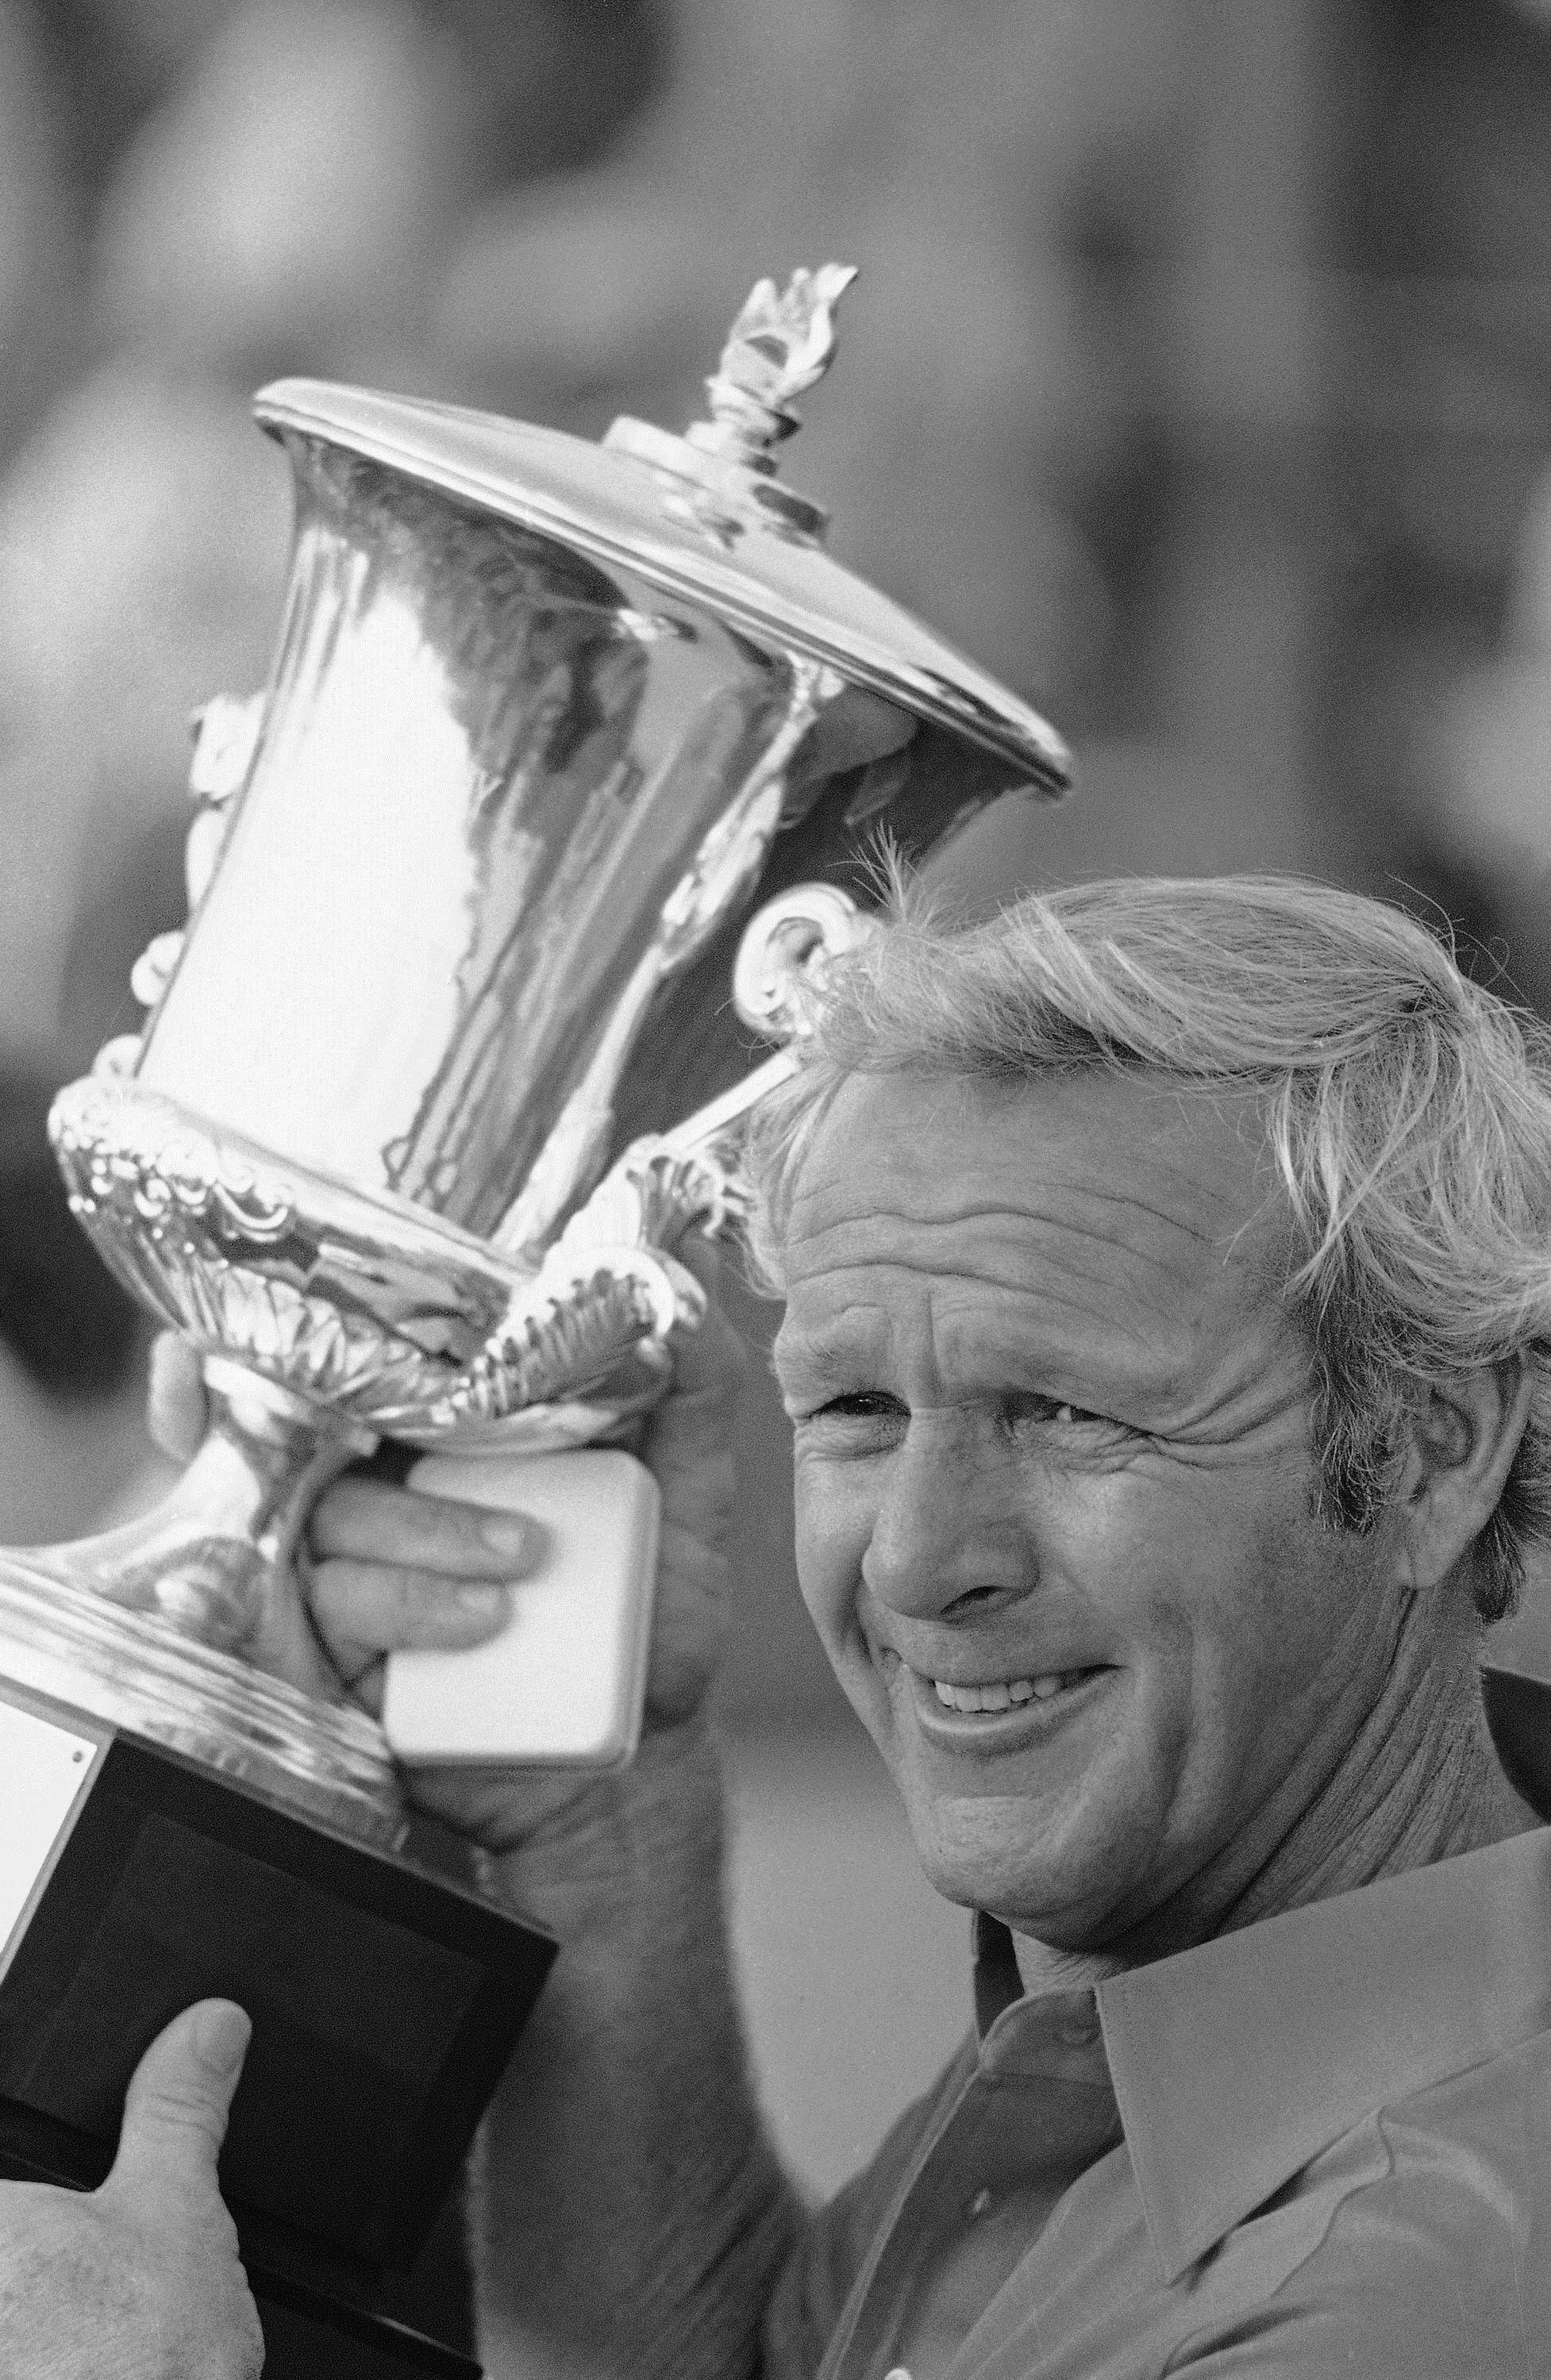 In Pics Remembering Golf Legend Arnold ‘The King’ Palmer